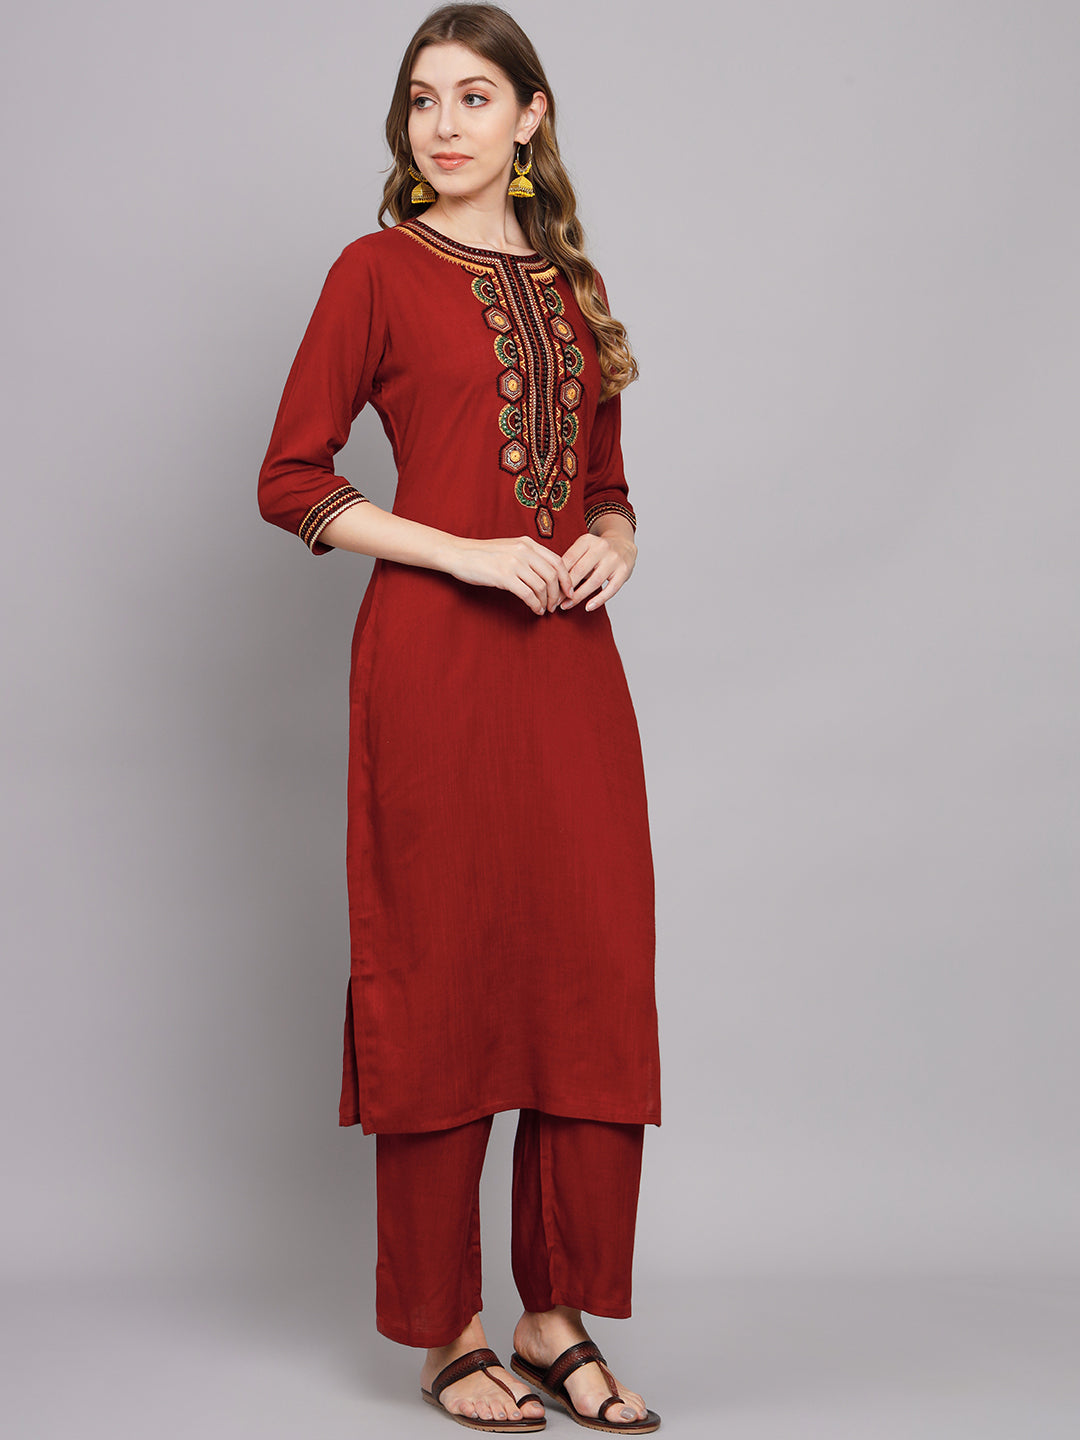 Women's Red Rayon Straight Ethnic Sets